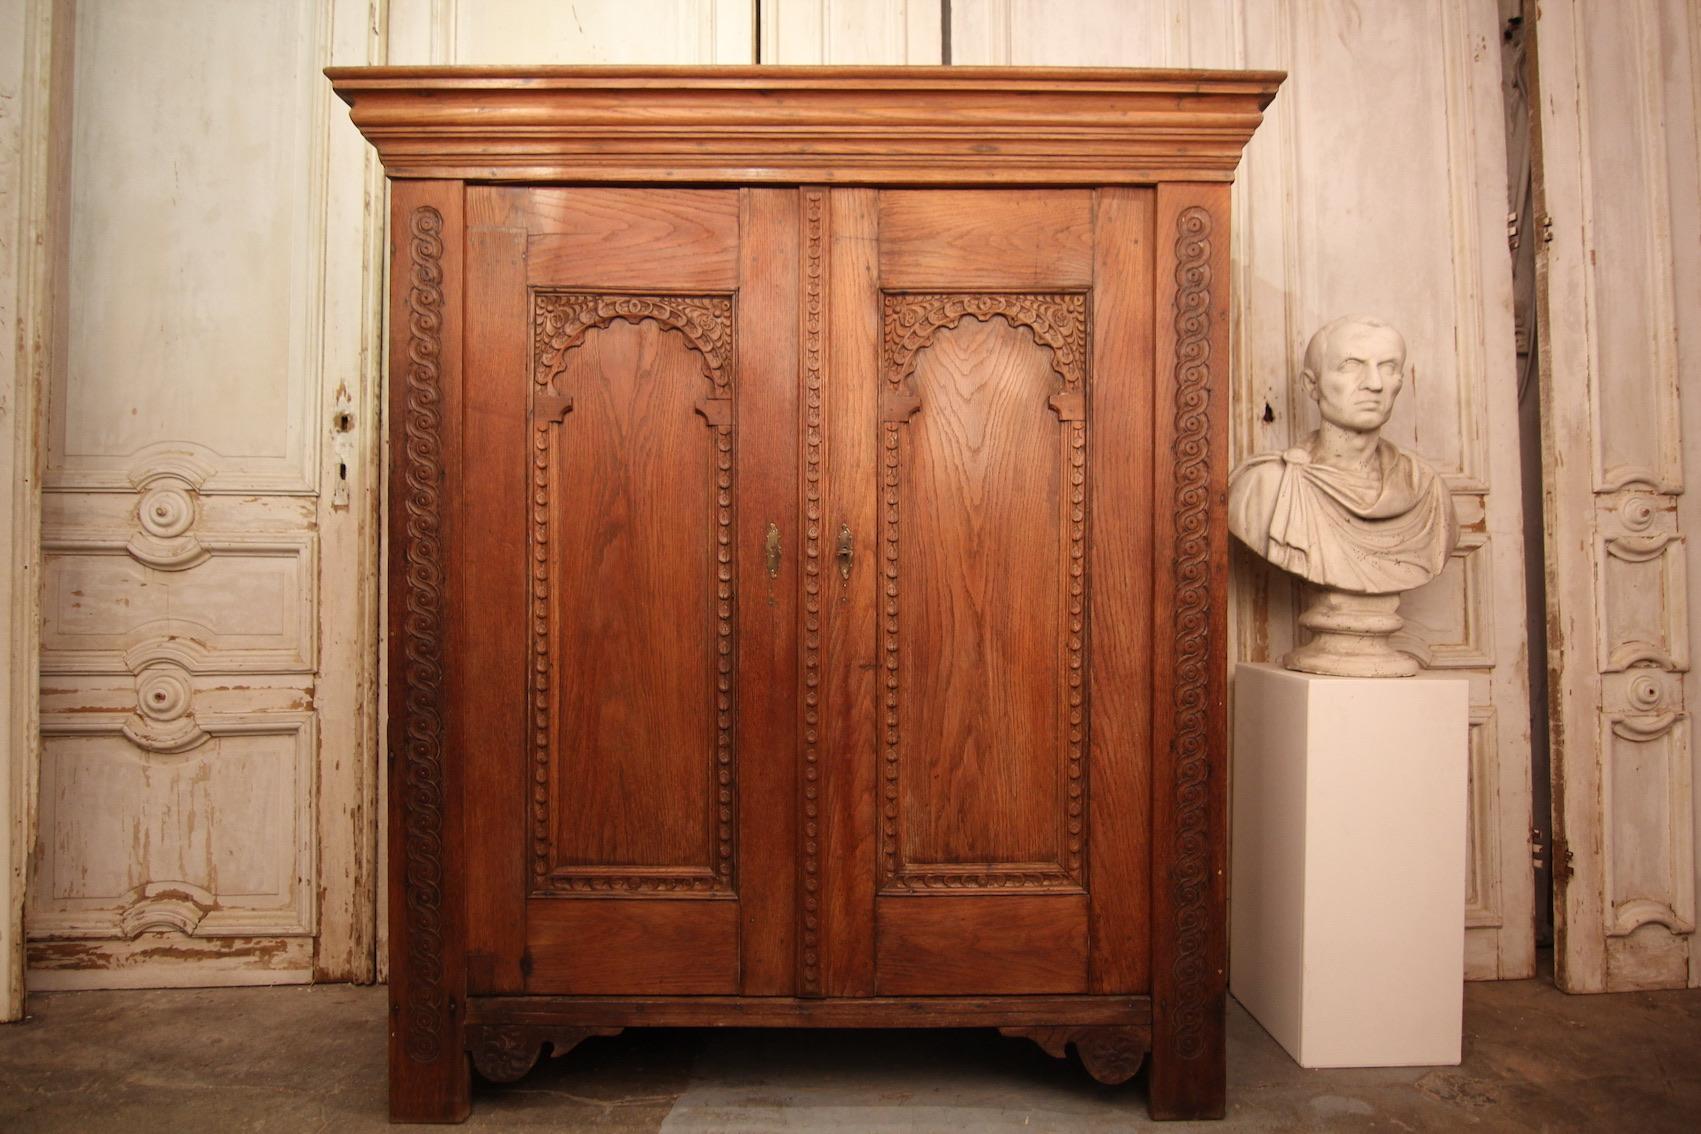 A 18th century German cupboard from the lower Rhine area.

Two-door oak corpus with projecting moulded cornice.
Doors and pilasters partially carved. Pilaster strips decorated with a wickerwork pattern.
Fixed shelves inside.

Dimensions: 
168